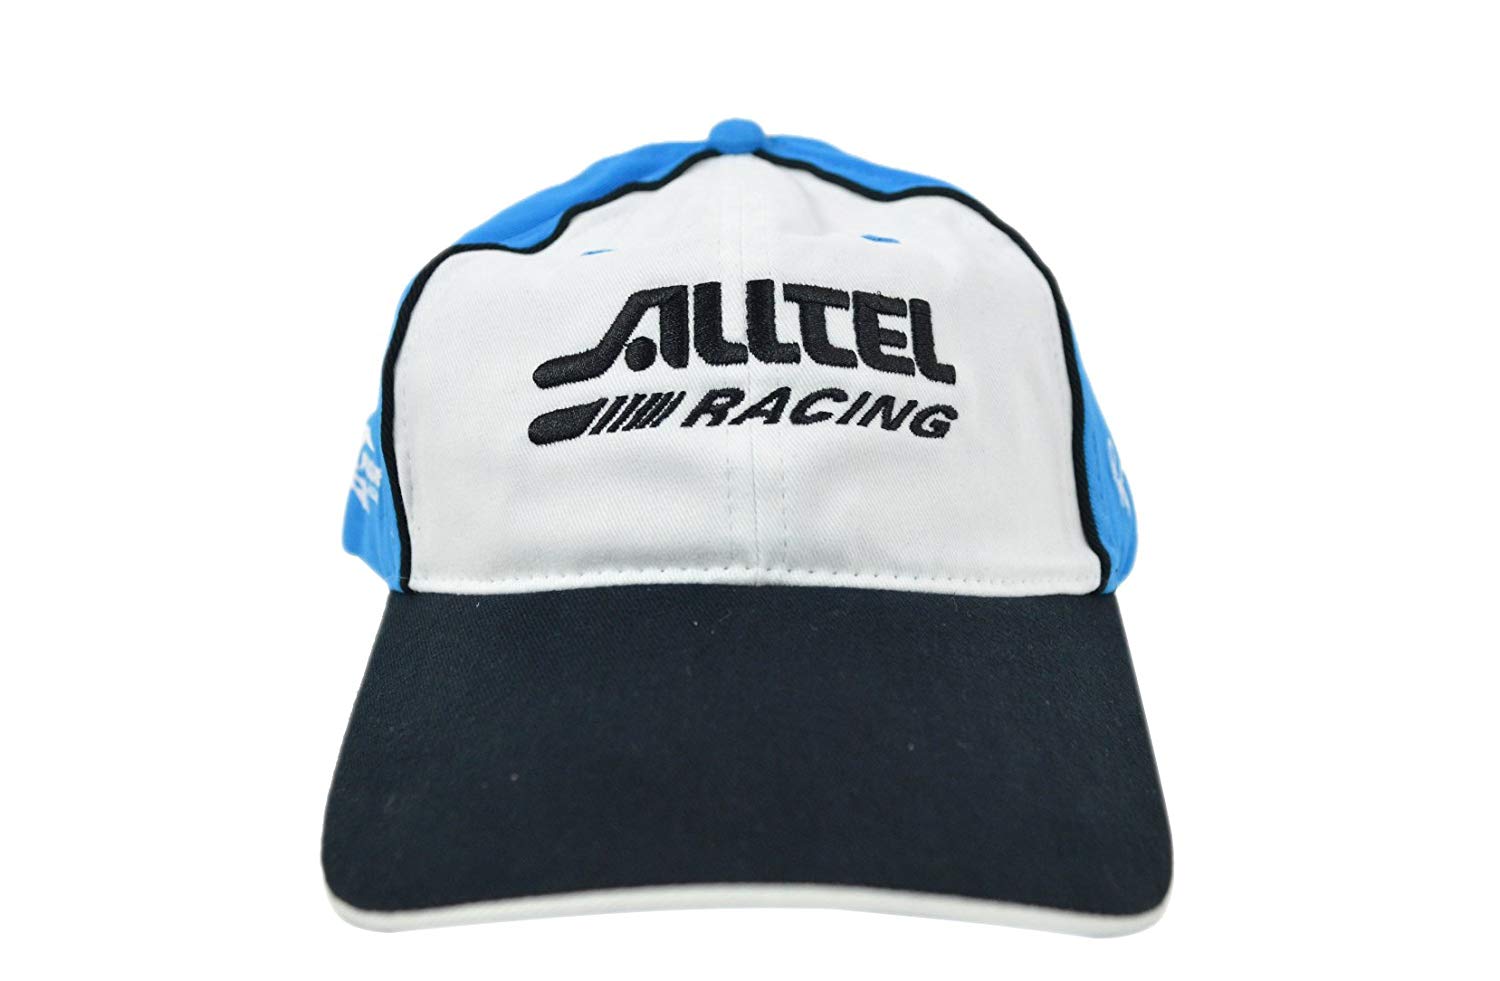 Official NASCAR Fan Shop Authentic Adjustable Baseball Caps. Show NASCAR Pride and Enjoy the comfort of these caps in cotton, mesh, polyester and khaki